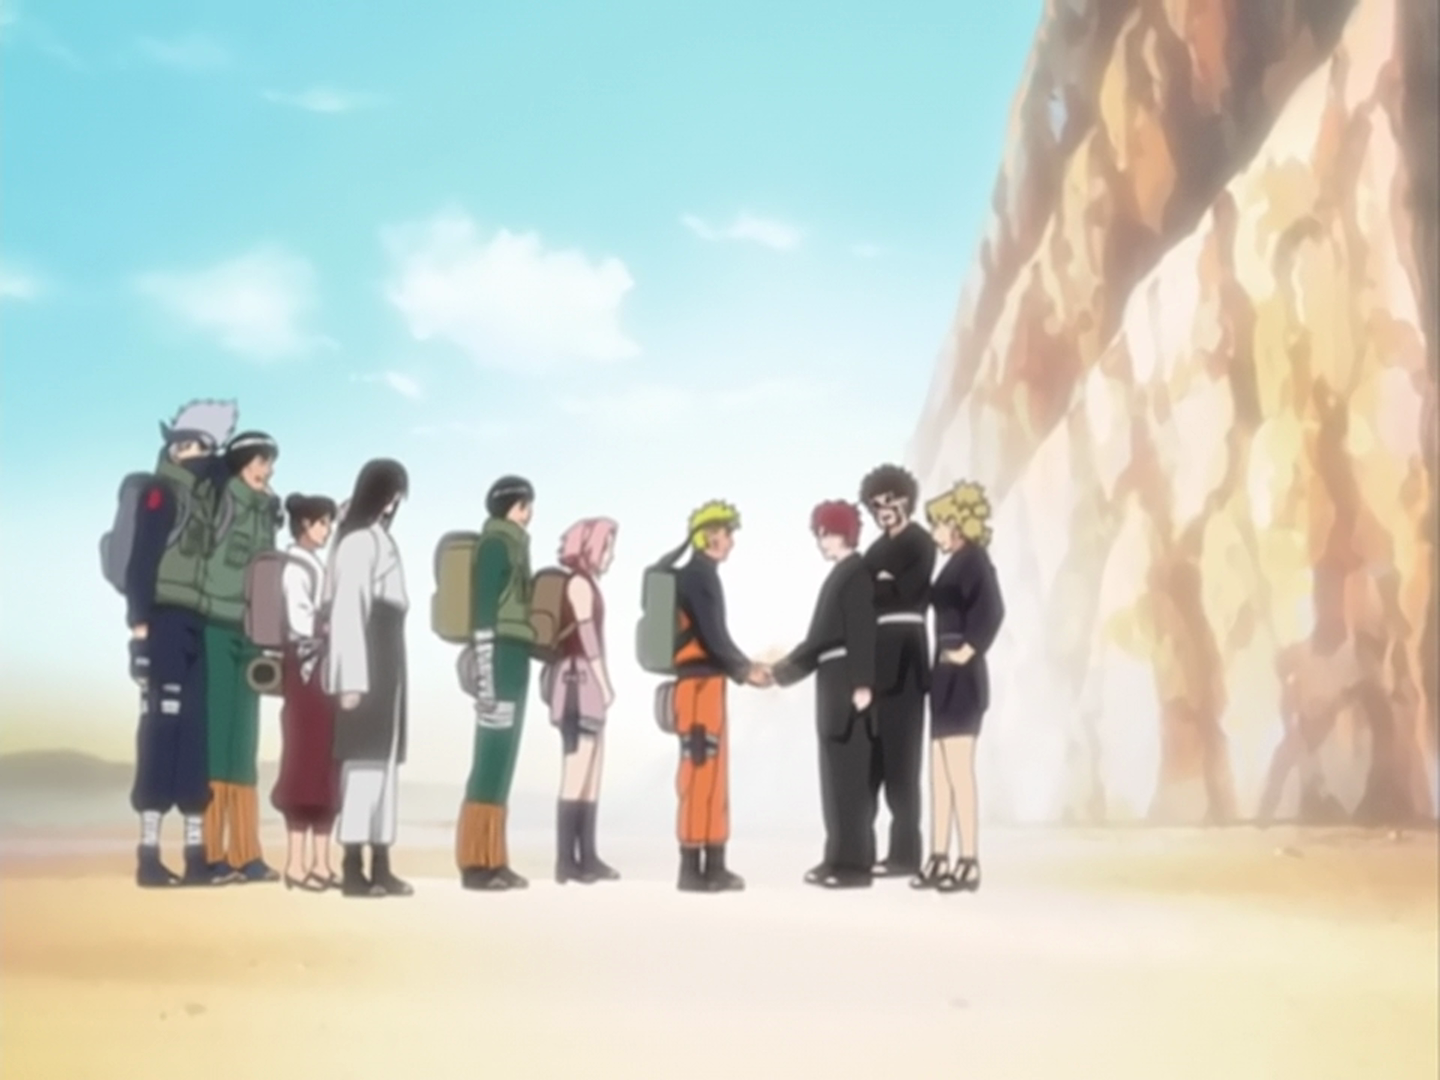 http://images4.wikia.nocookie.net/__cb20130218032750/naruto/images/9/9f/Naruto_shakes_hands_with_Gaara.png